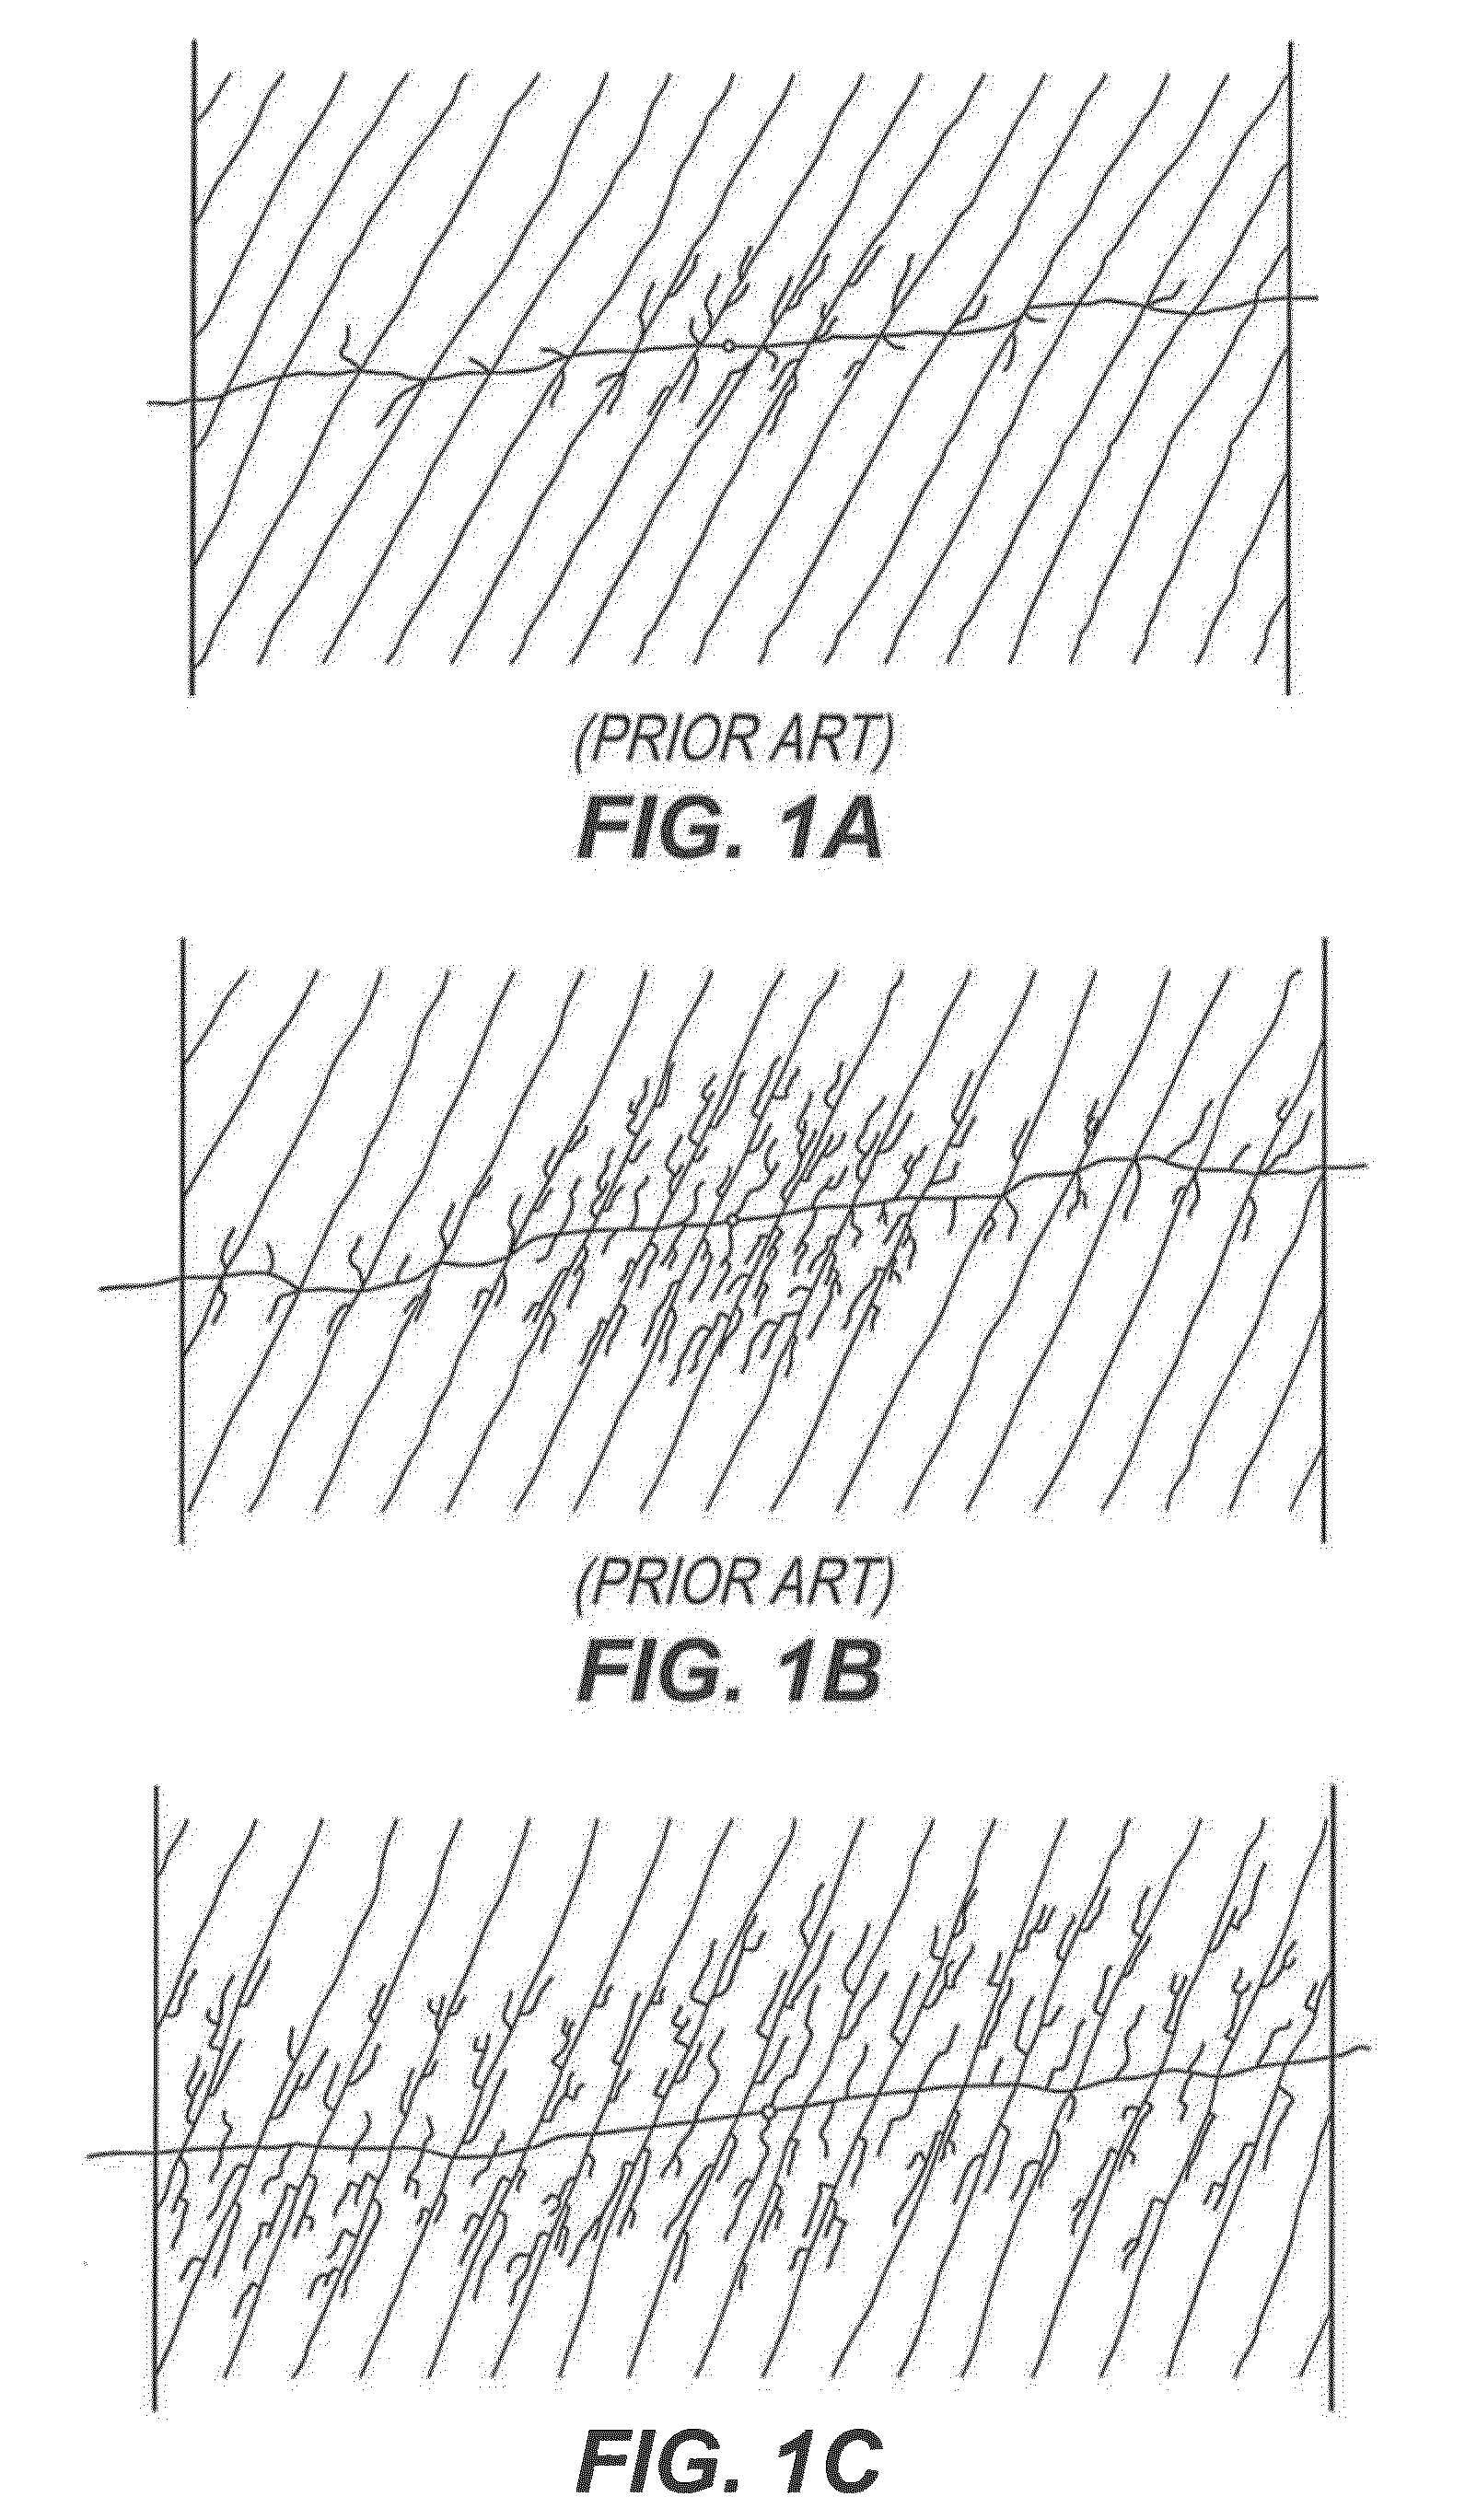 Method of enhancing the complexity of a fracture network within a subterranean formation